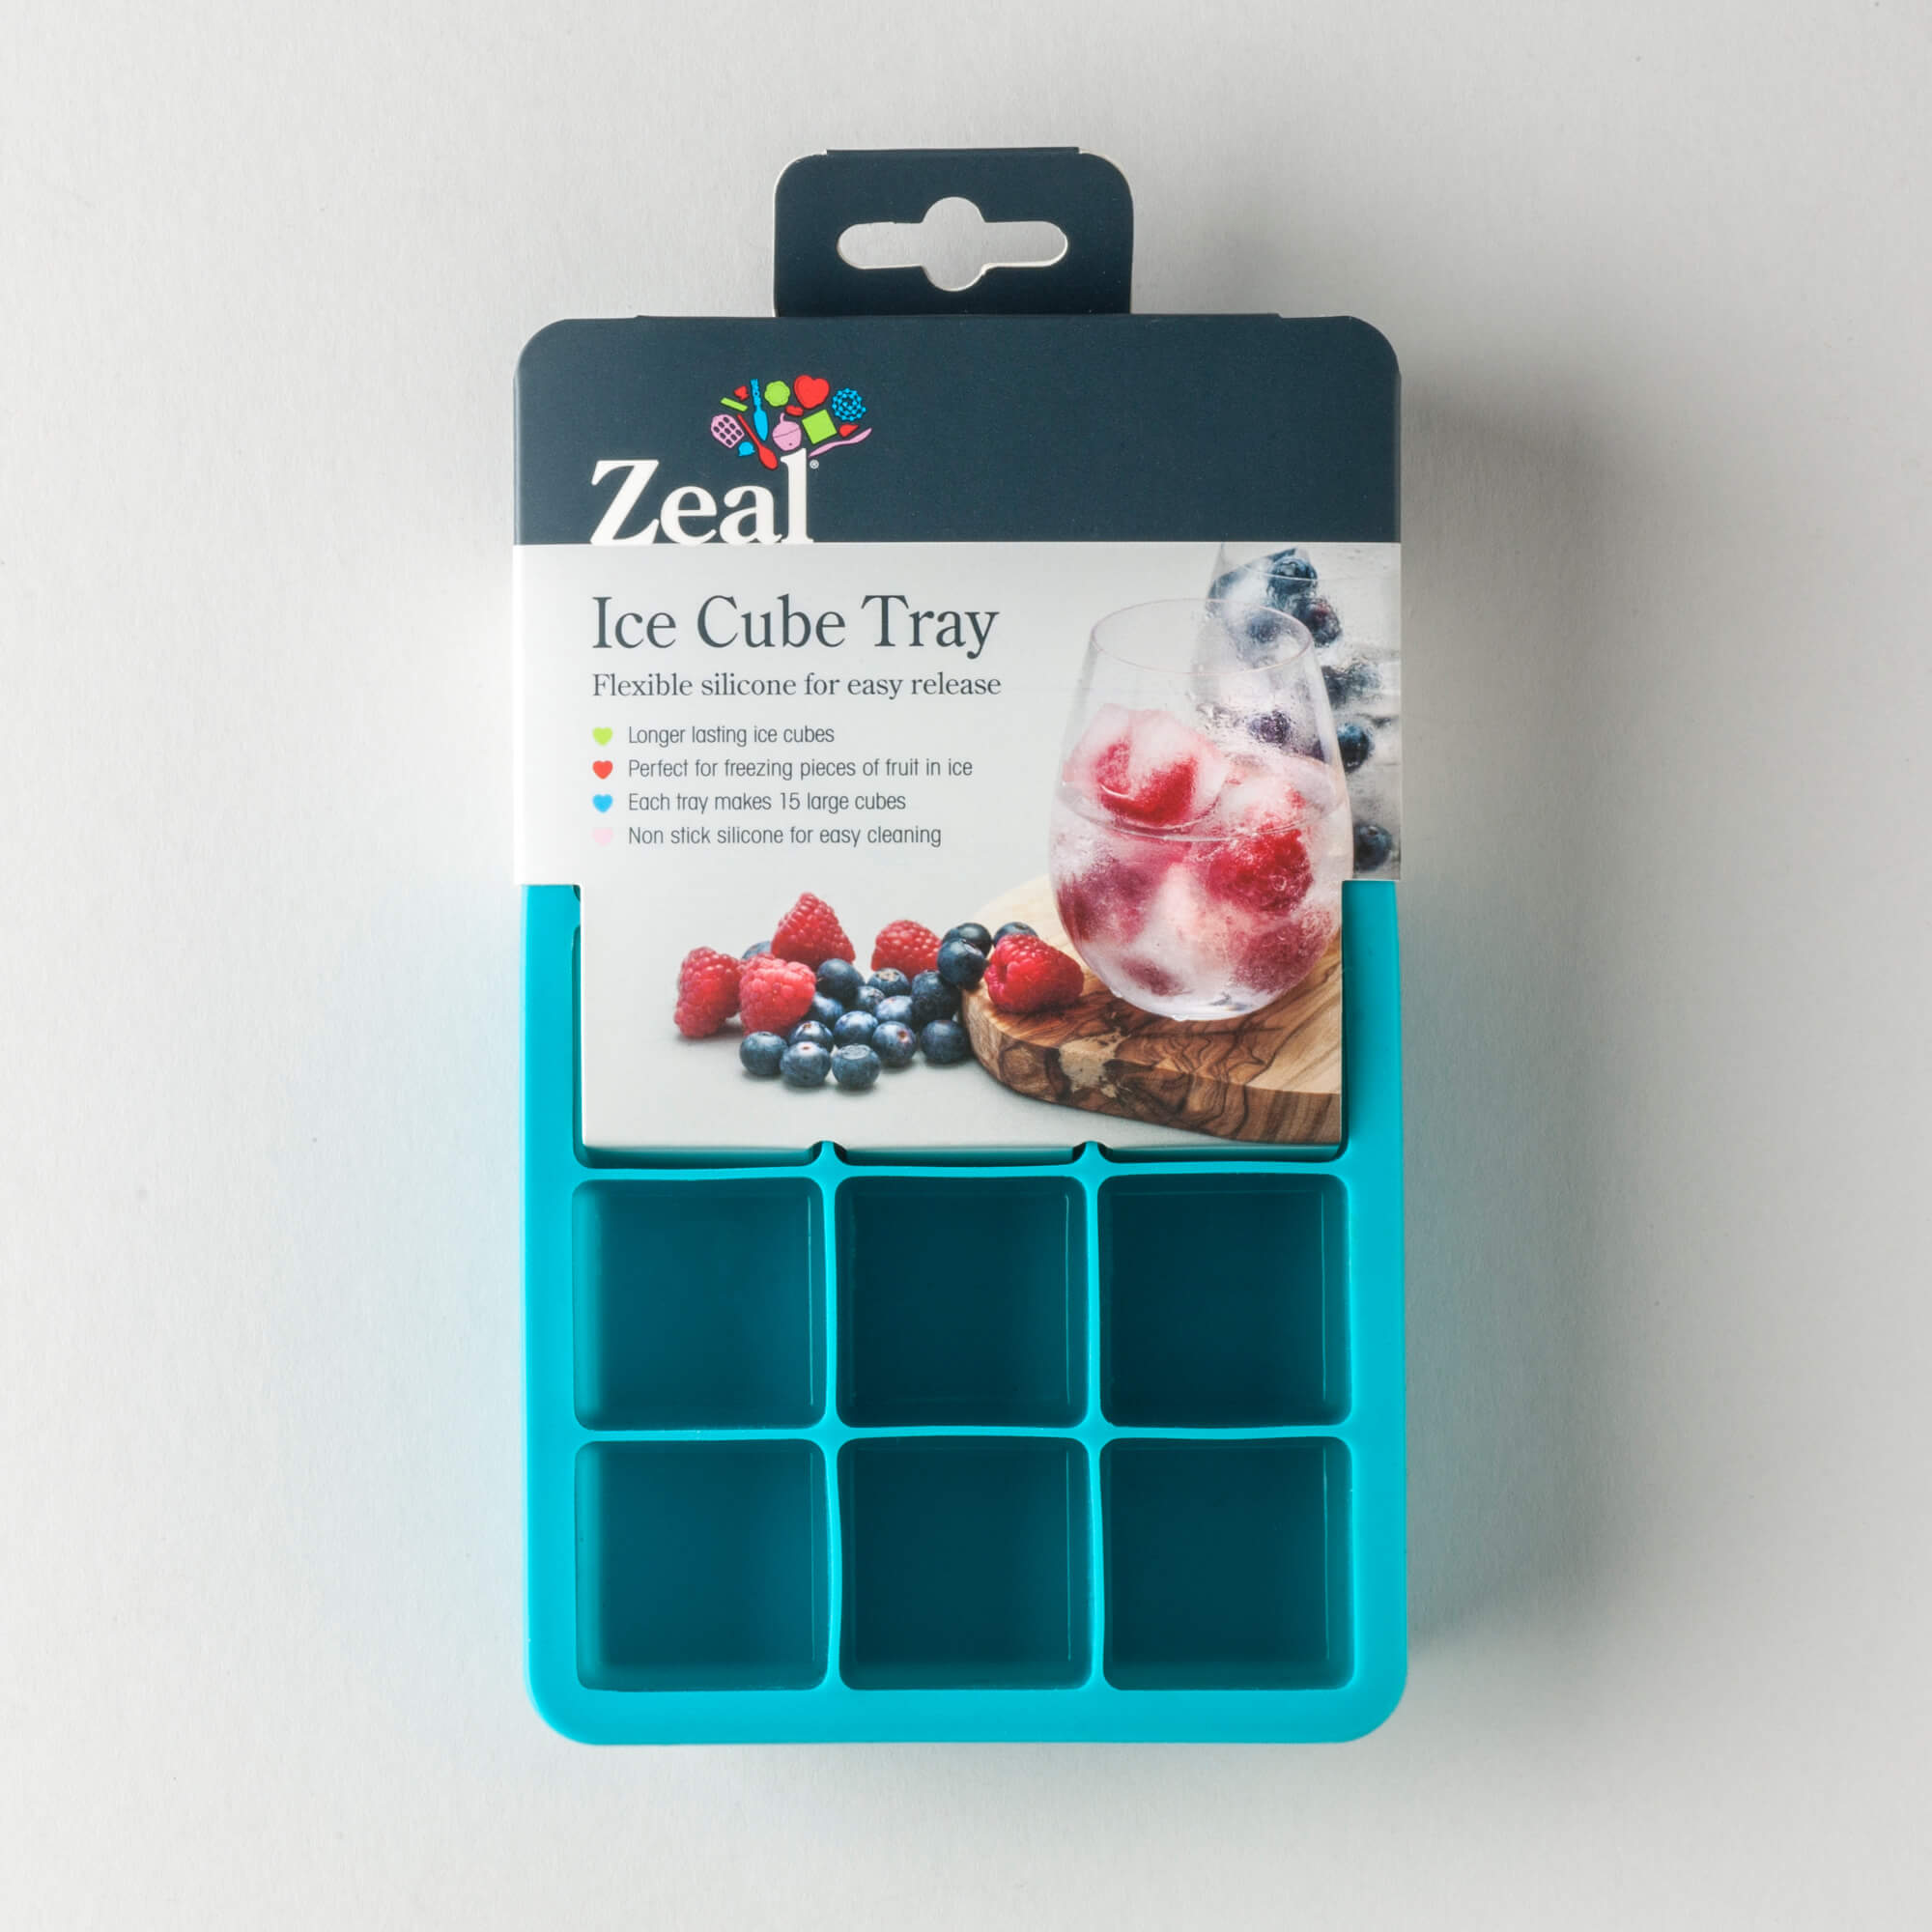 Zeal Extra Large Ice Cube Tray in packaging